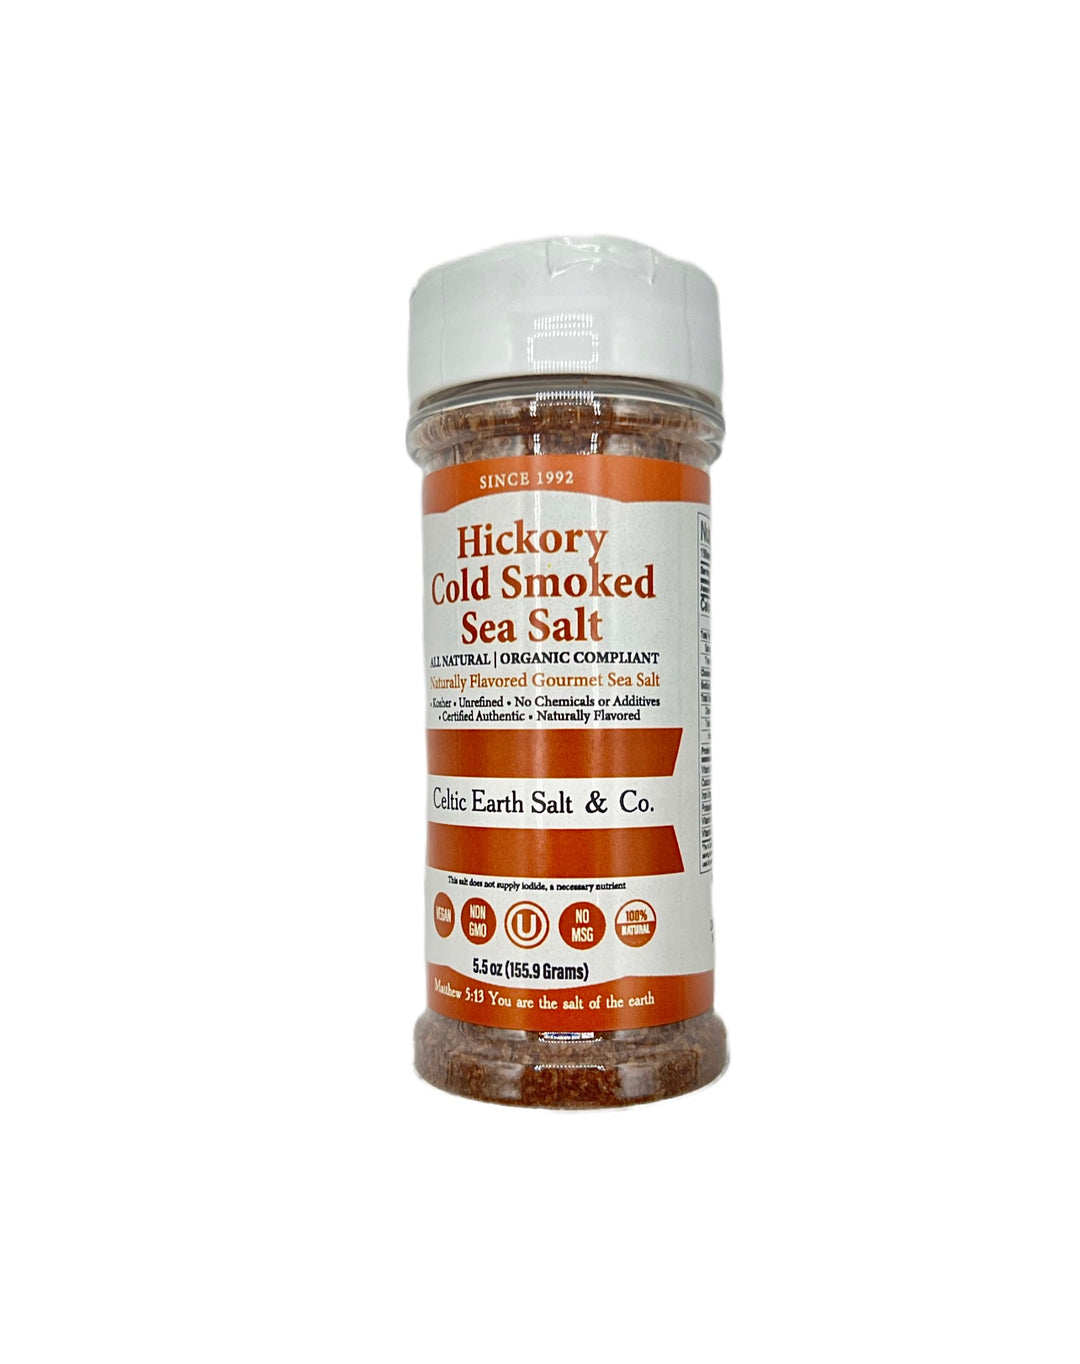 Hickory Cold Smoked Sea Salt All Natural Organic 79+ Minerals